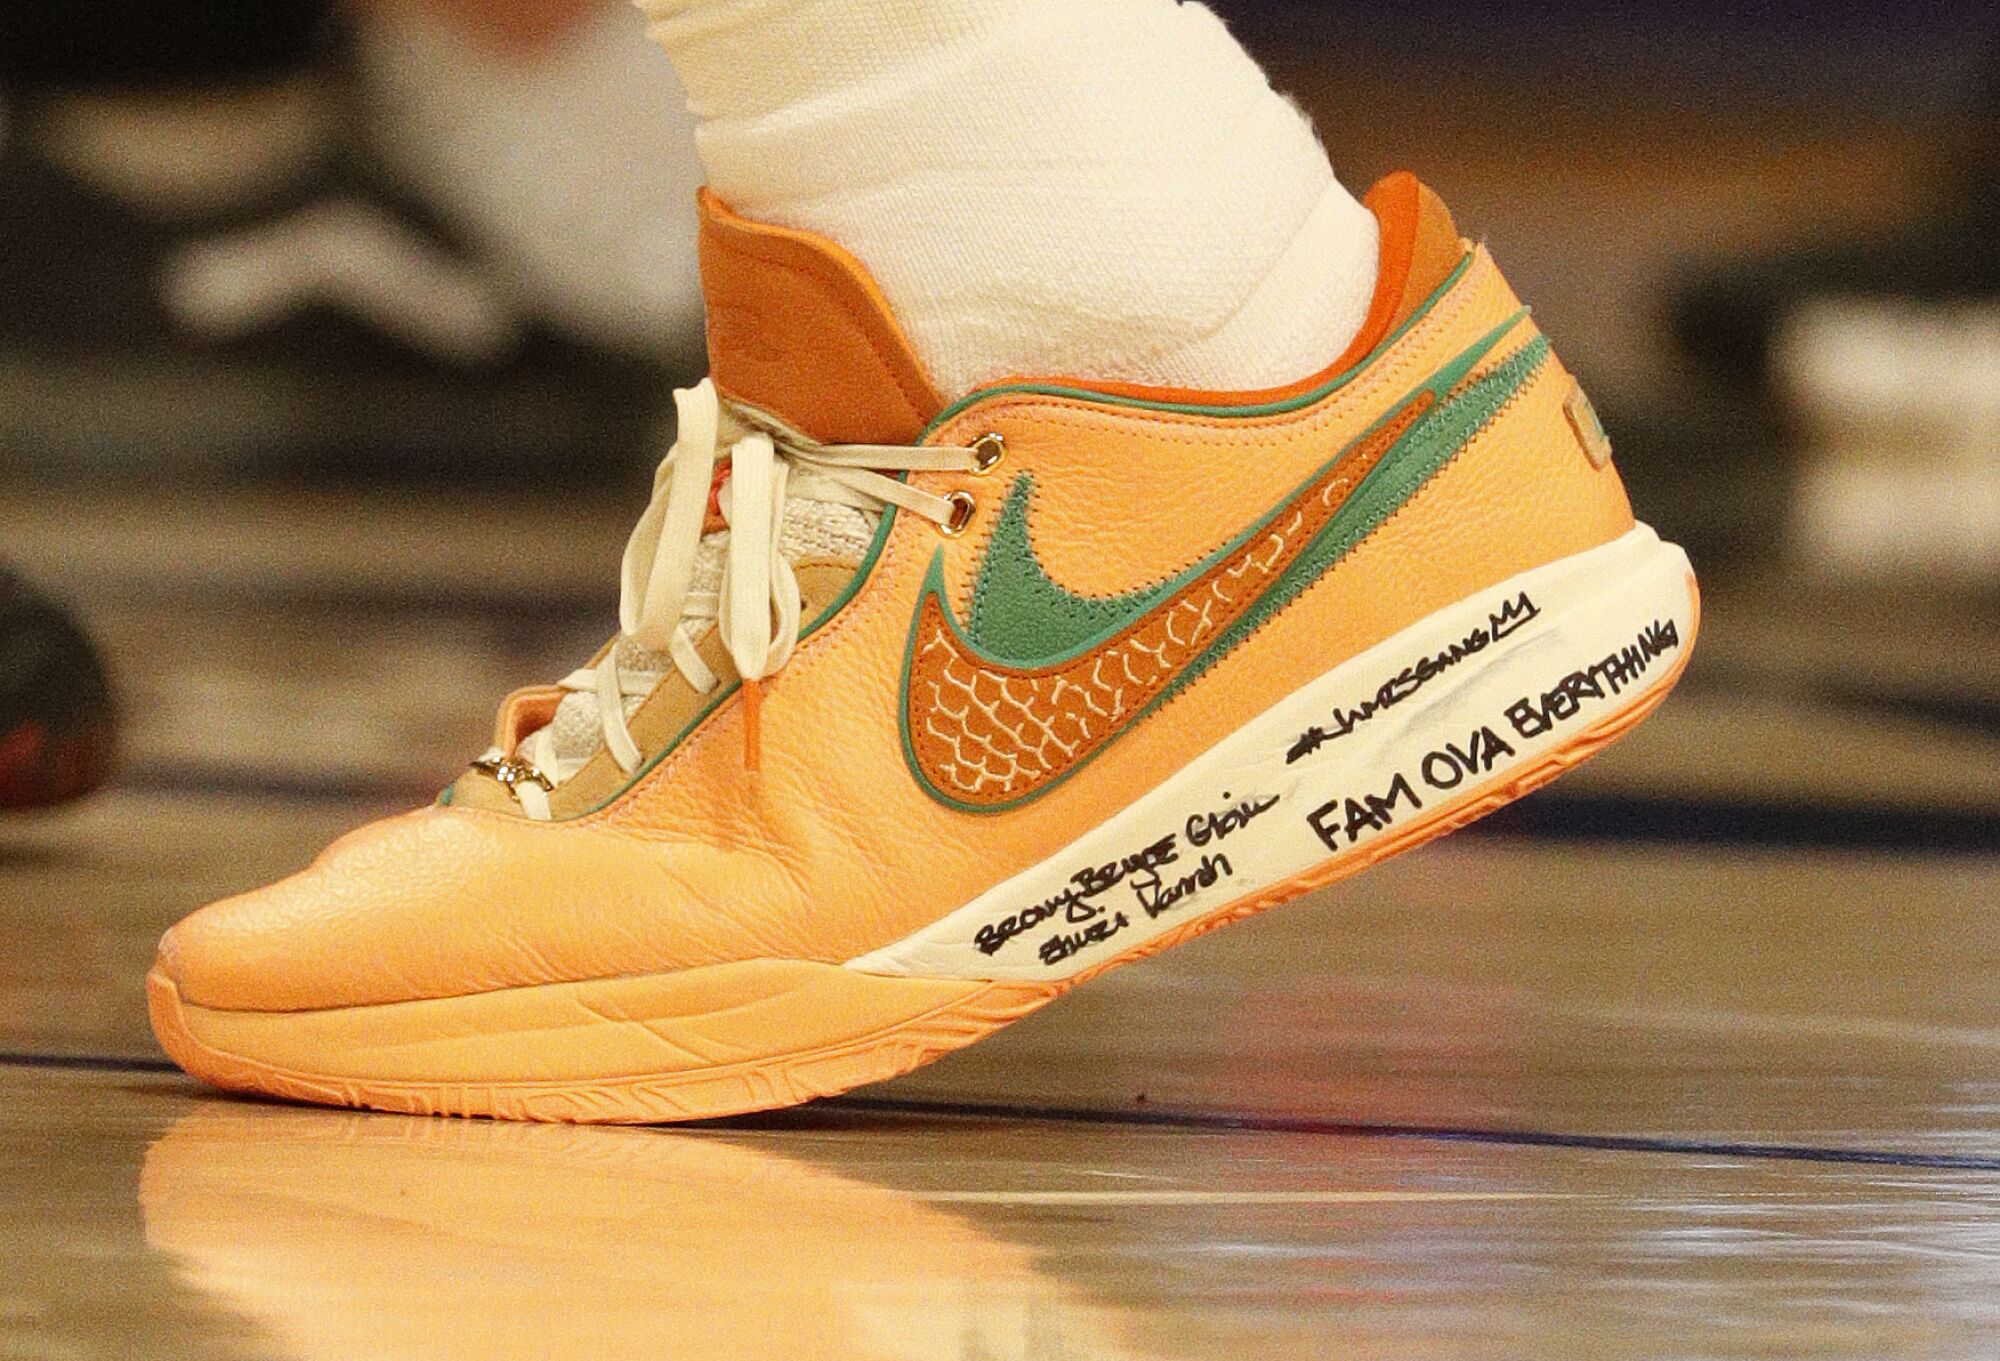 The shoe of Lakers forward LeBron James displays his family's names and "FAM OVA EVERYTHING" written on the side.